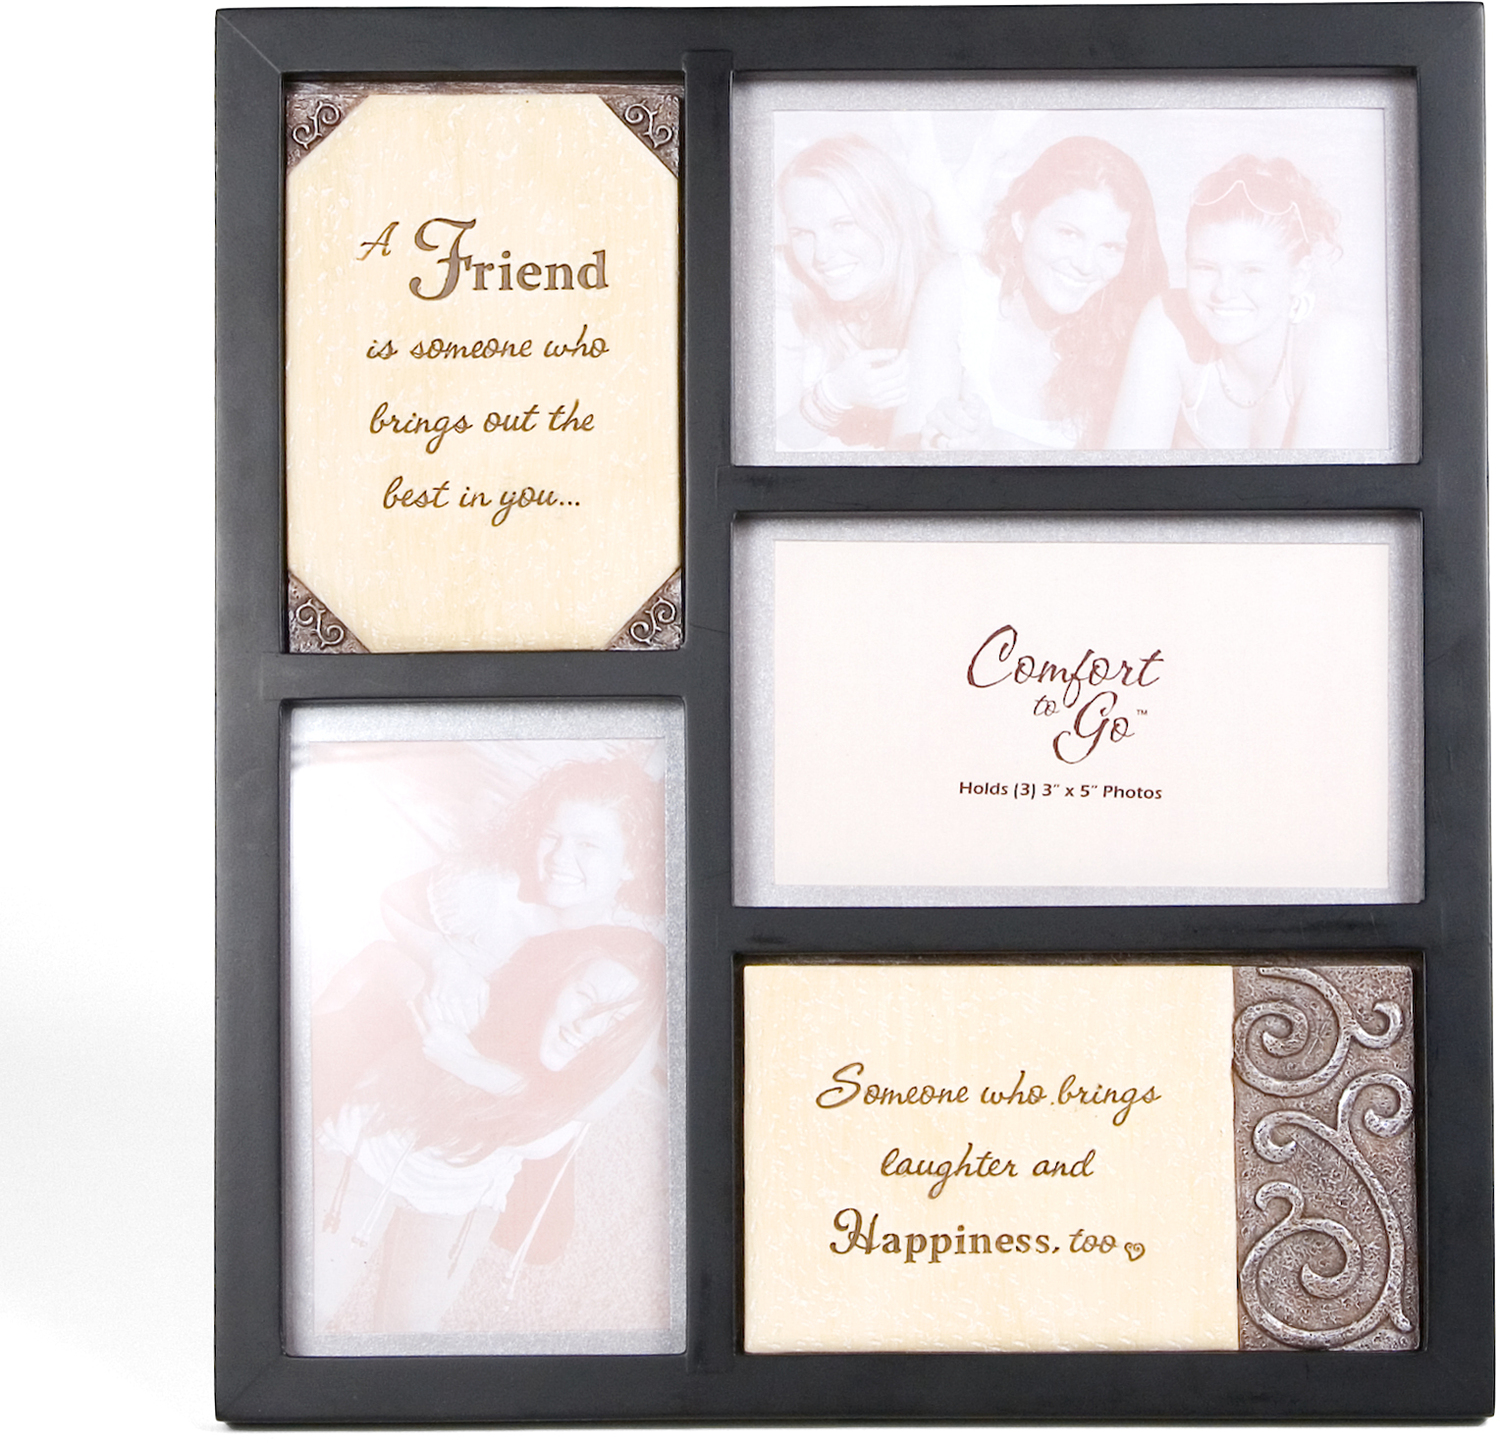 Friend by Comfort to Go - Friend - 10.5" Collage Frame with Plaques